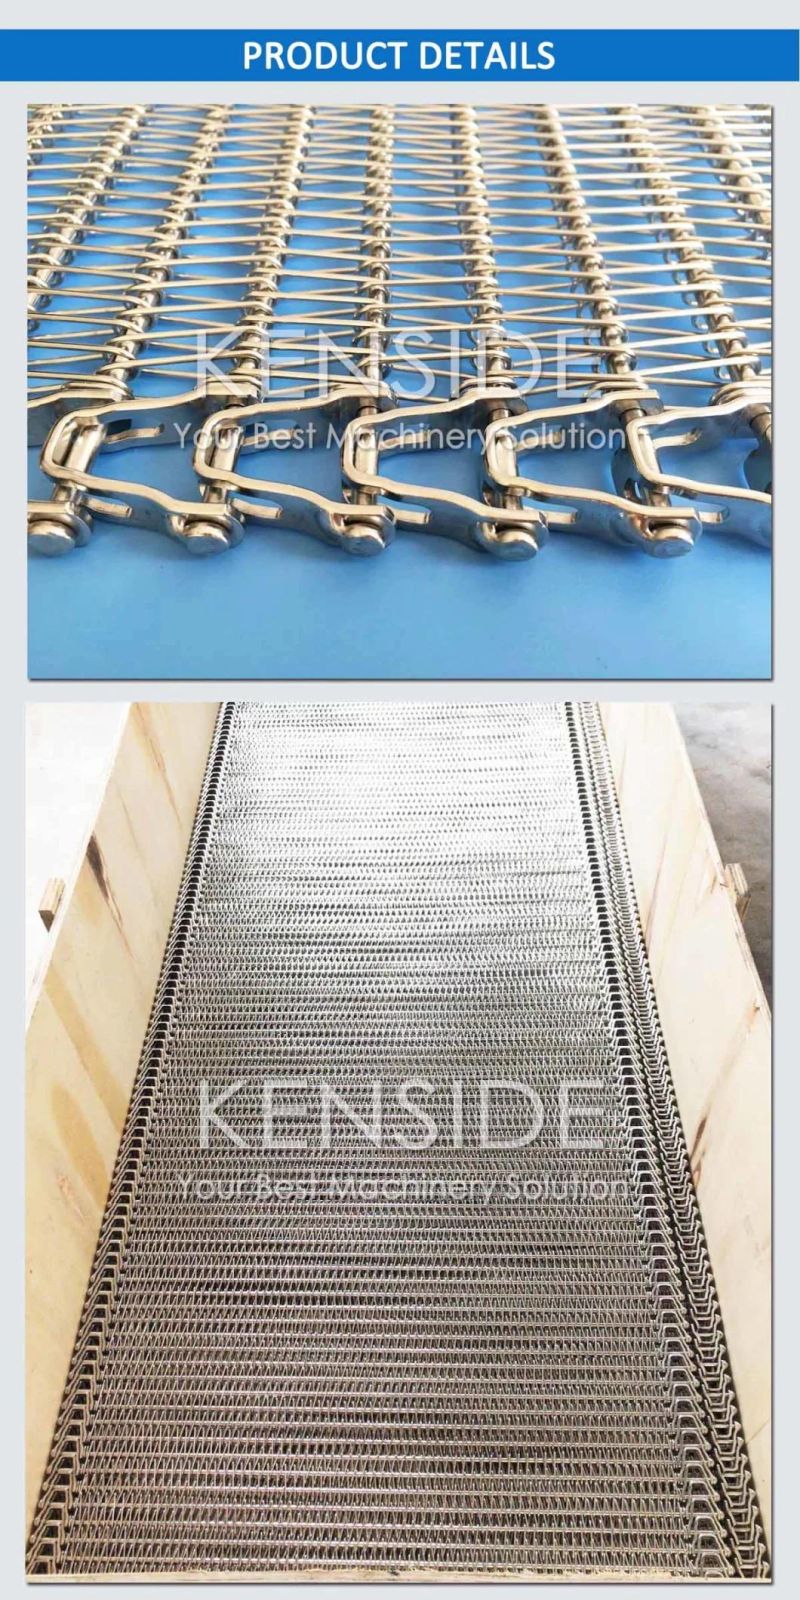 Stainless Steel Belting Spiral Conveyor Belts Reduced Radius Belts for The Food Industry